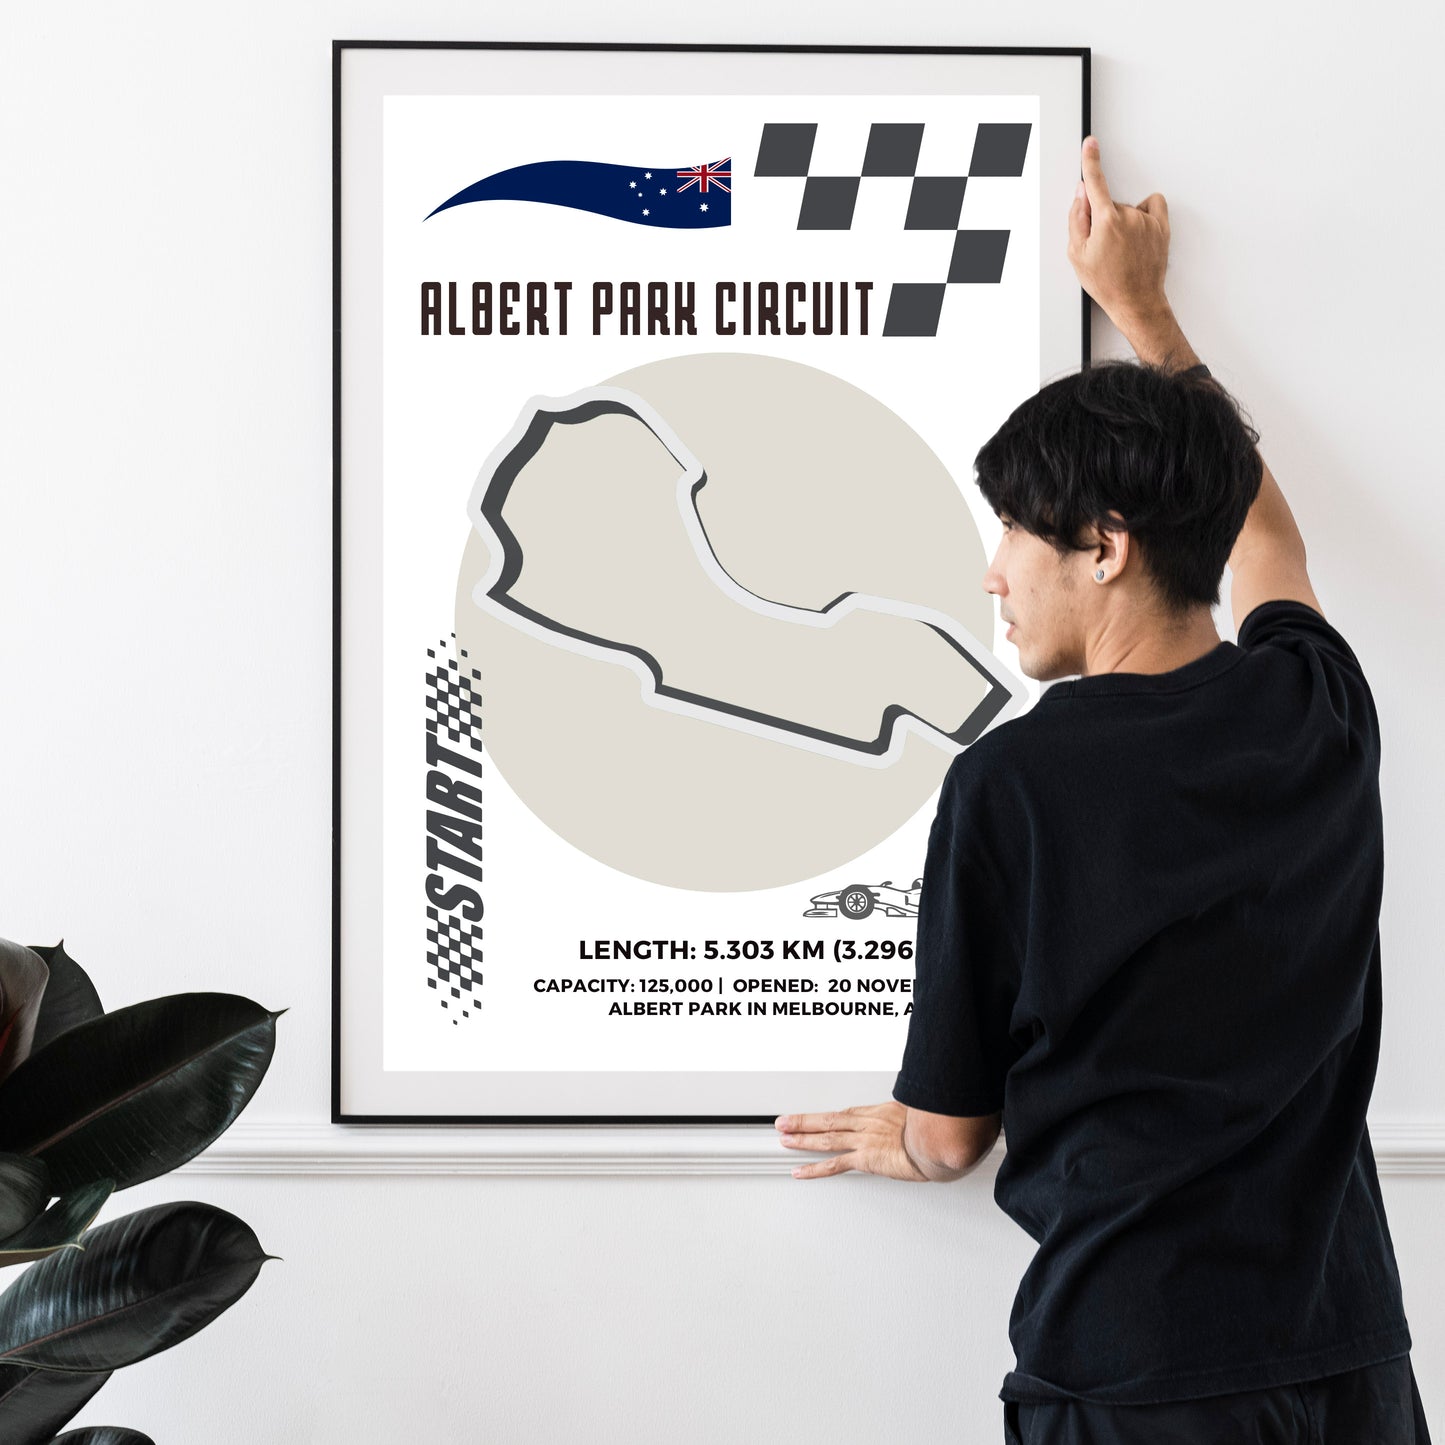 Elevate your love for Formula One with our Albert Park Circuit F1 Posters. Each print features a detailed Map circuit guide and historical information. Made with premium, age-resistant paper and produced in the UK, these posters are a must-have for any F1 fan. Combine with a "Formula One Poster" for a complete look.